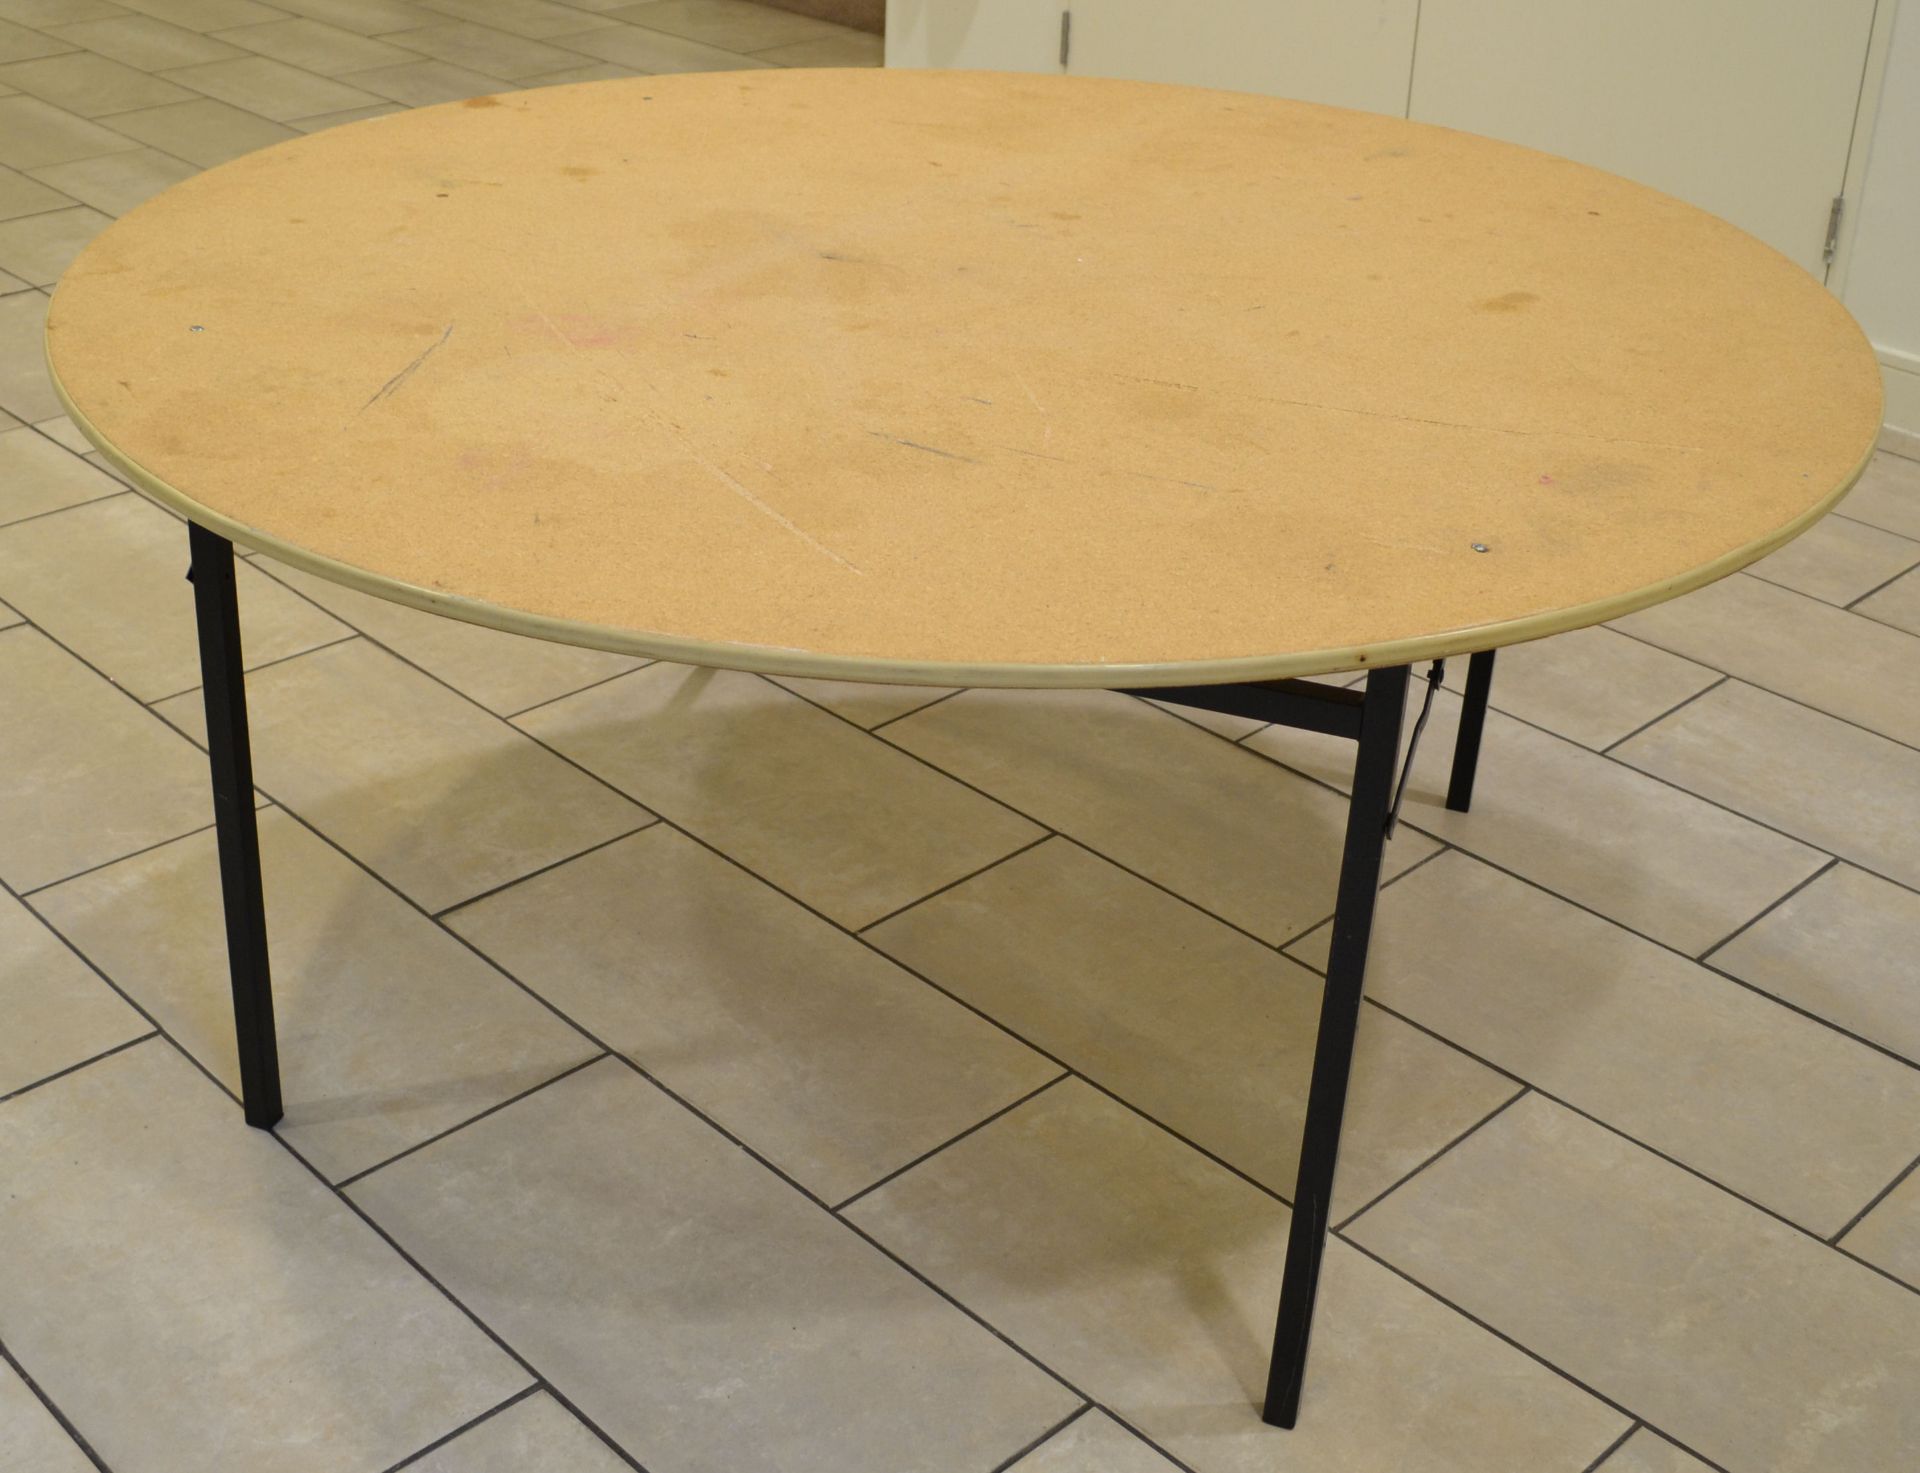 4 x 5 Foot Folding Round Banqueting Tables - CL152 - Location: Altrincham WA14 With a rubber-edged - Image 8 of 12